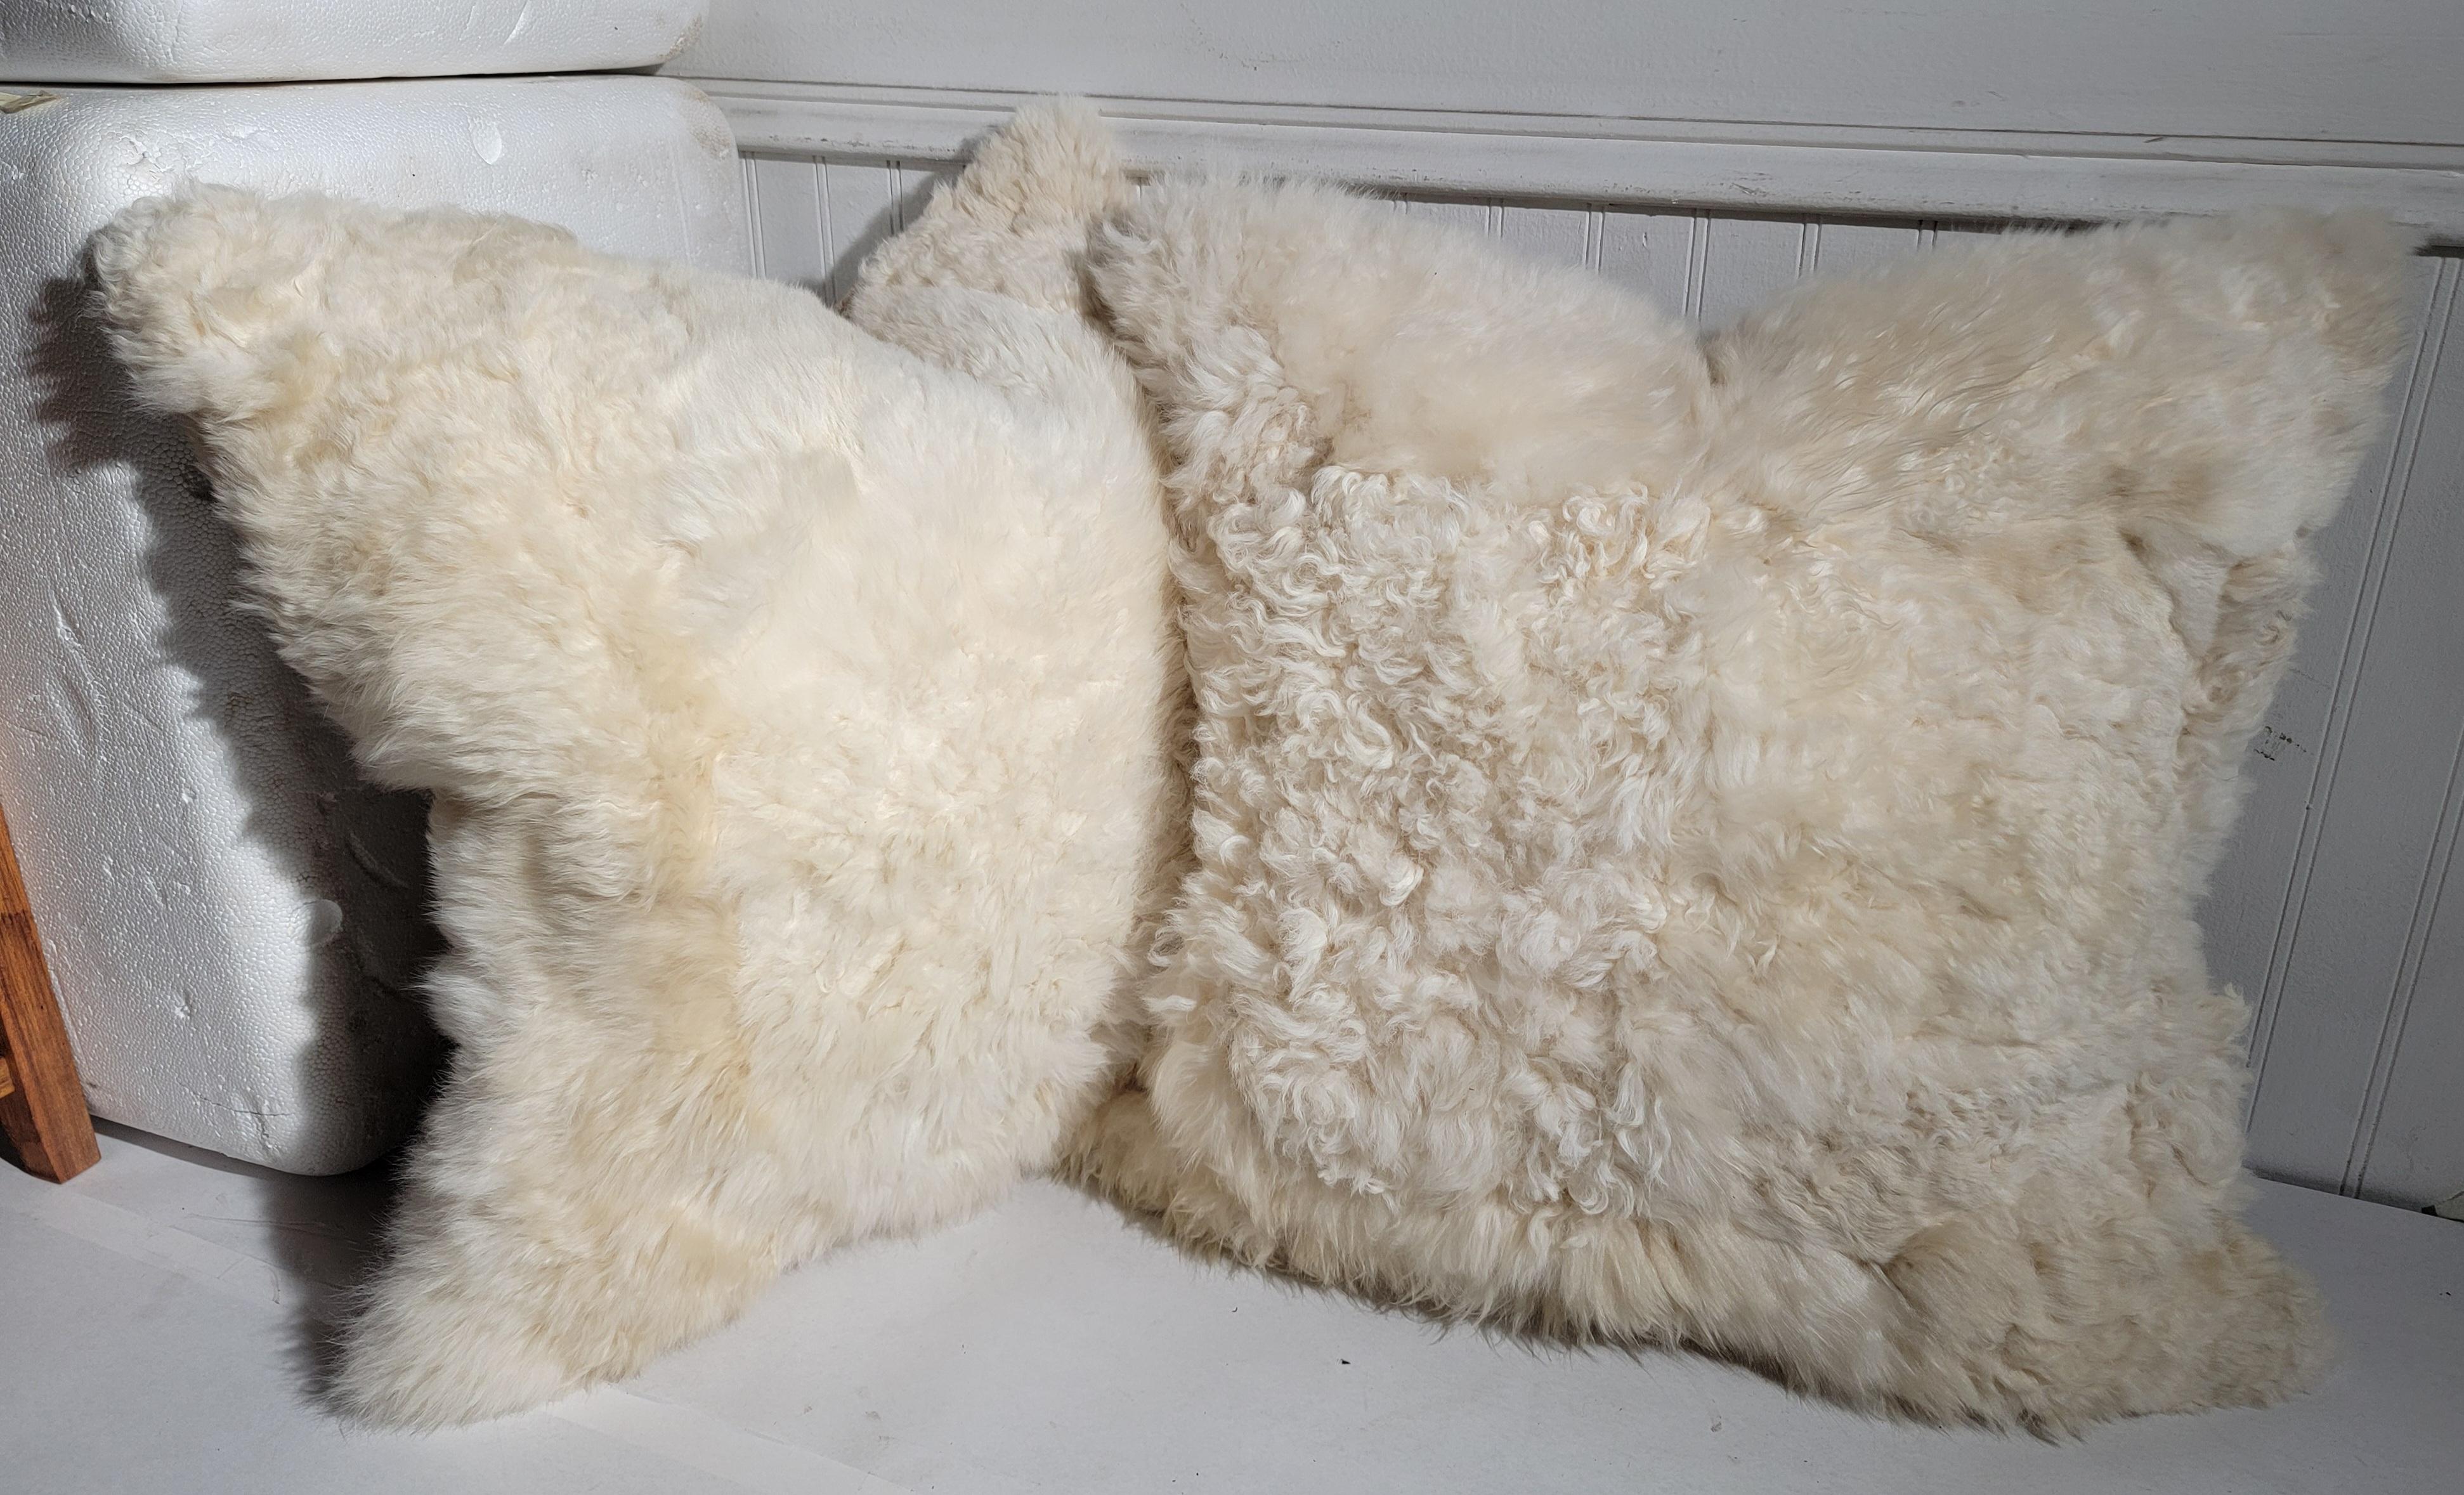 These super soft & plush sheepskin pillows are truely amazing ! Sold individually or as a pair.The backings are in a fo lambskin also very soft and comfortable.
Priced as a pair.